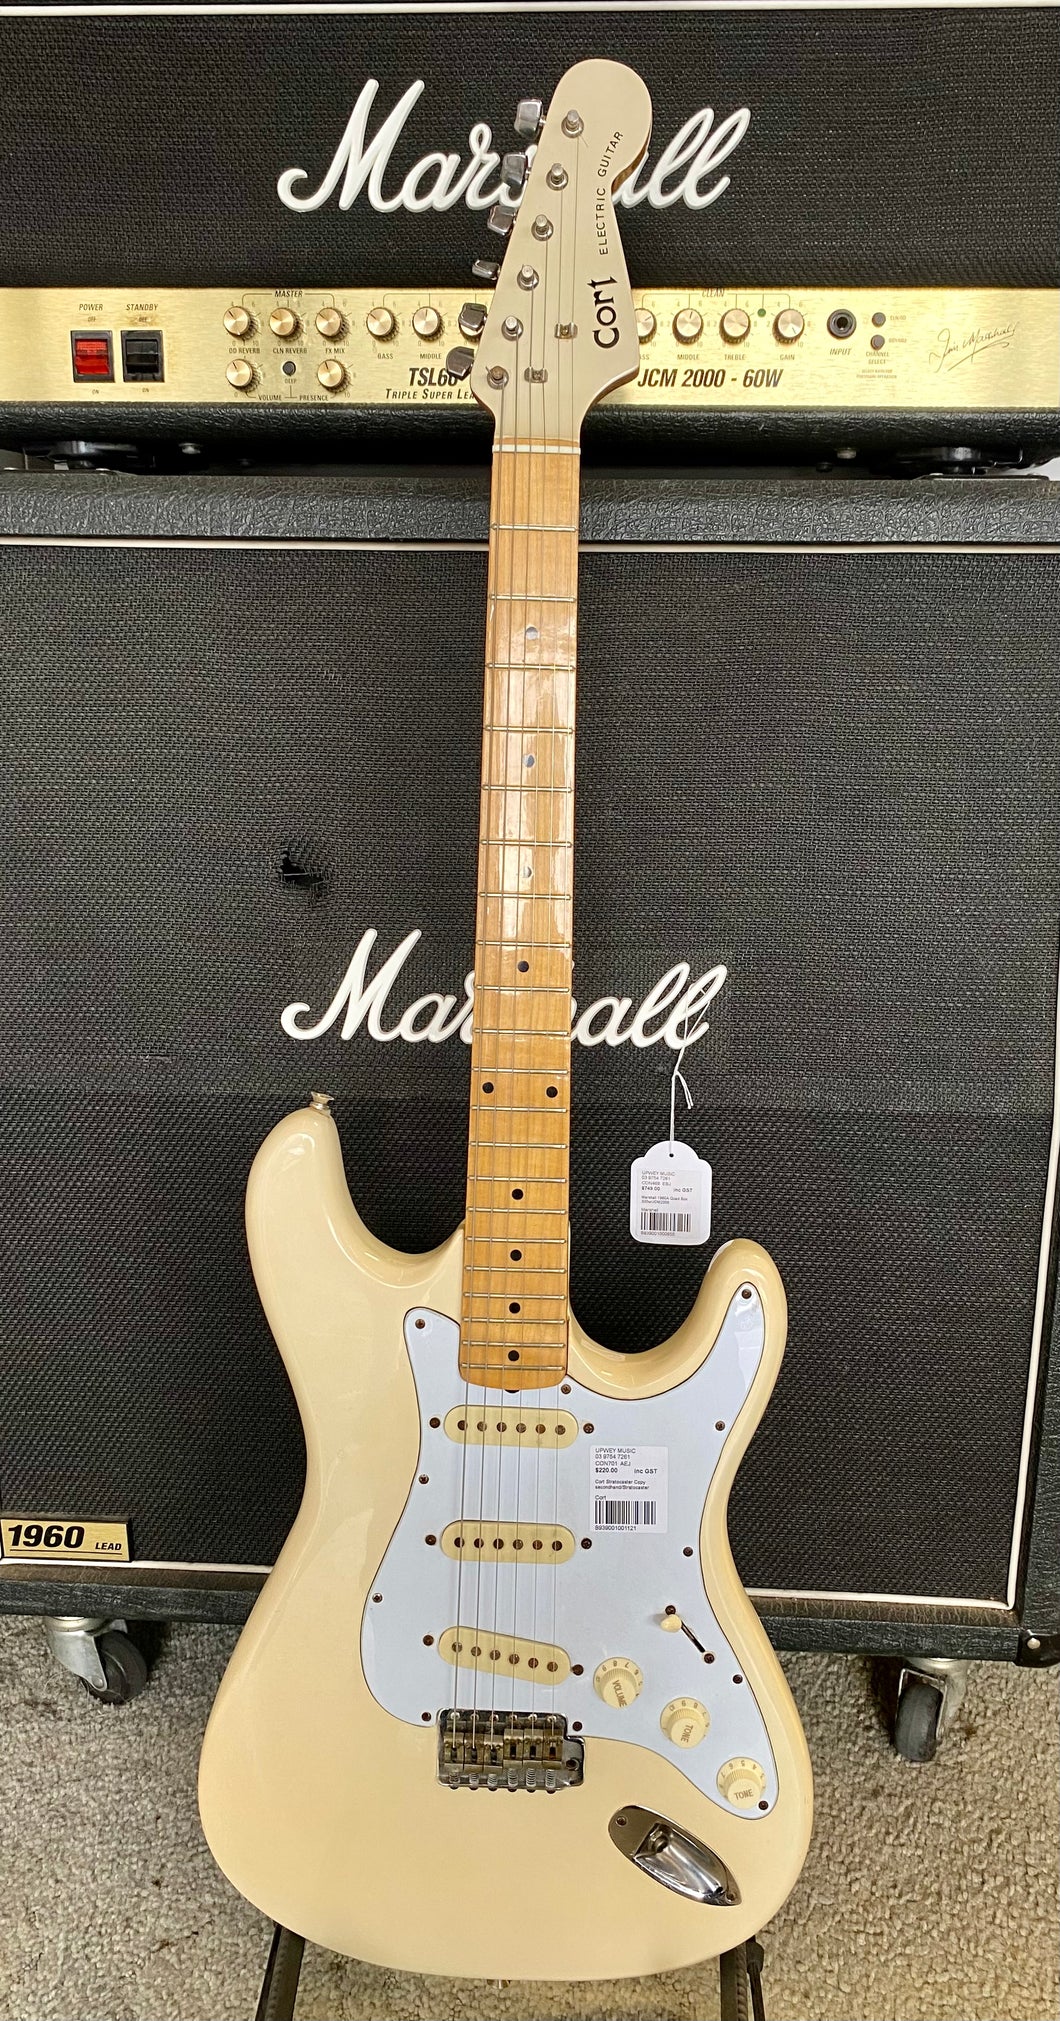 Cort Stratocaster Copy secondhand